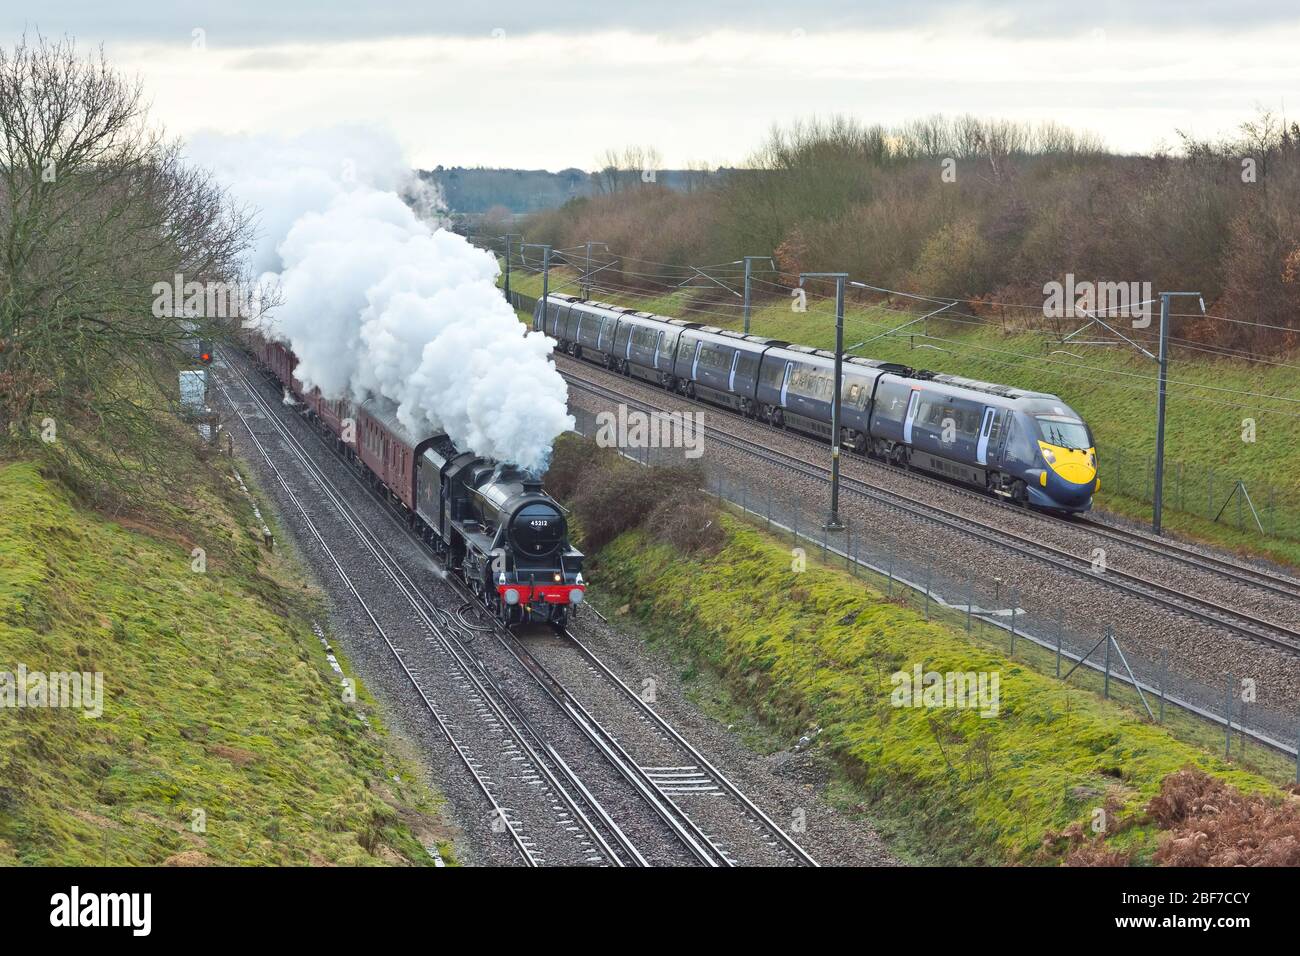 LMS Black 5 Steam engine races a Class 395 High Speed Train though Kent, UK on HS1 Stock Photo